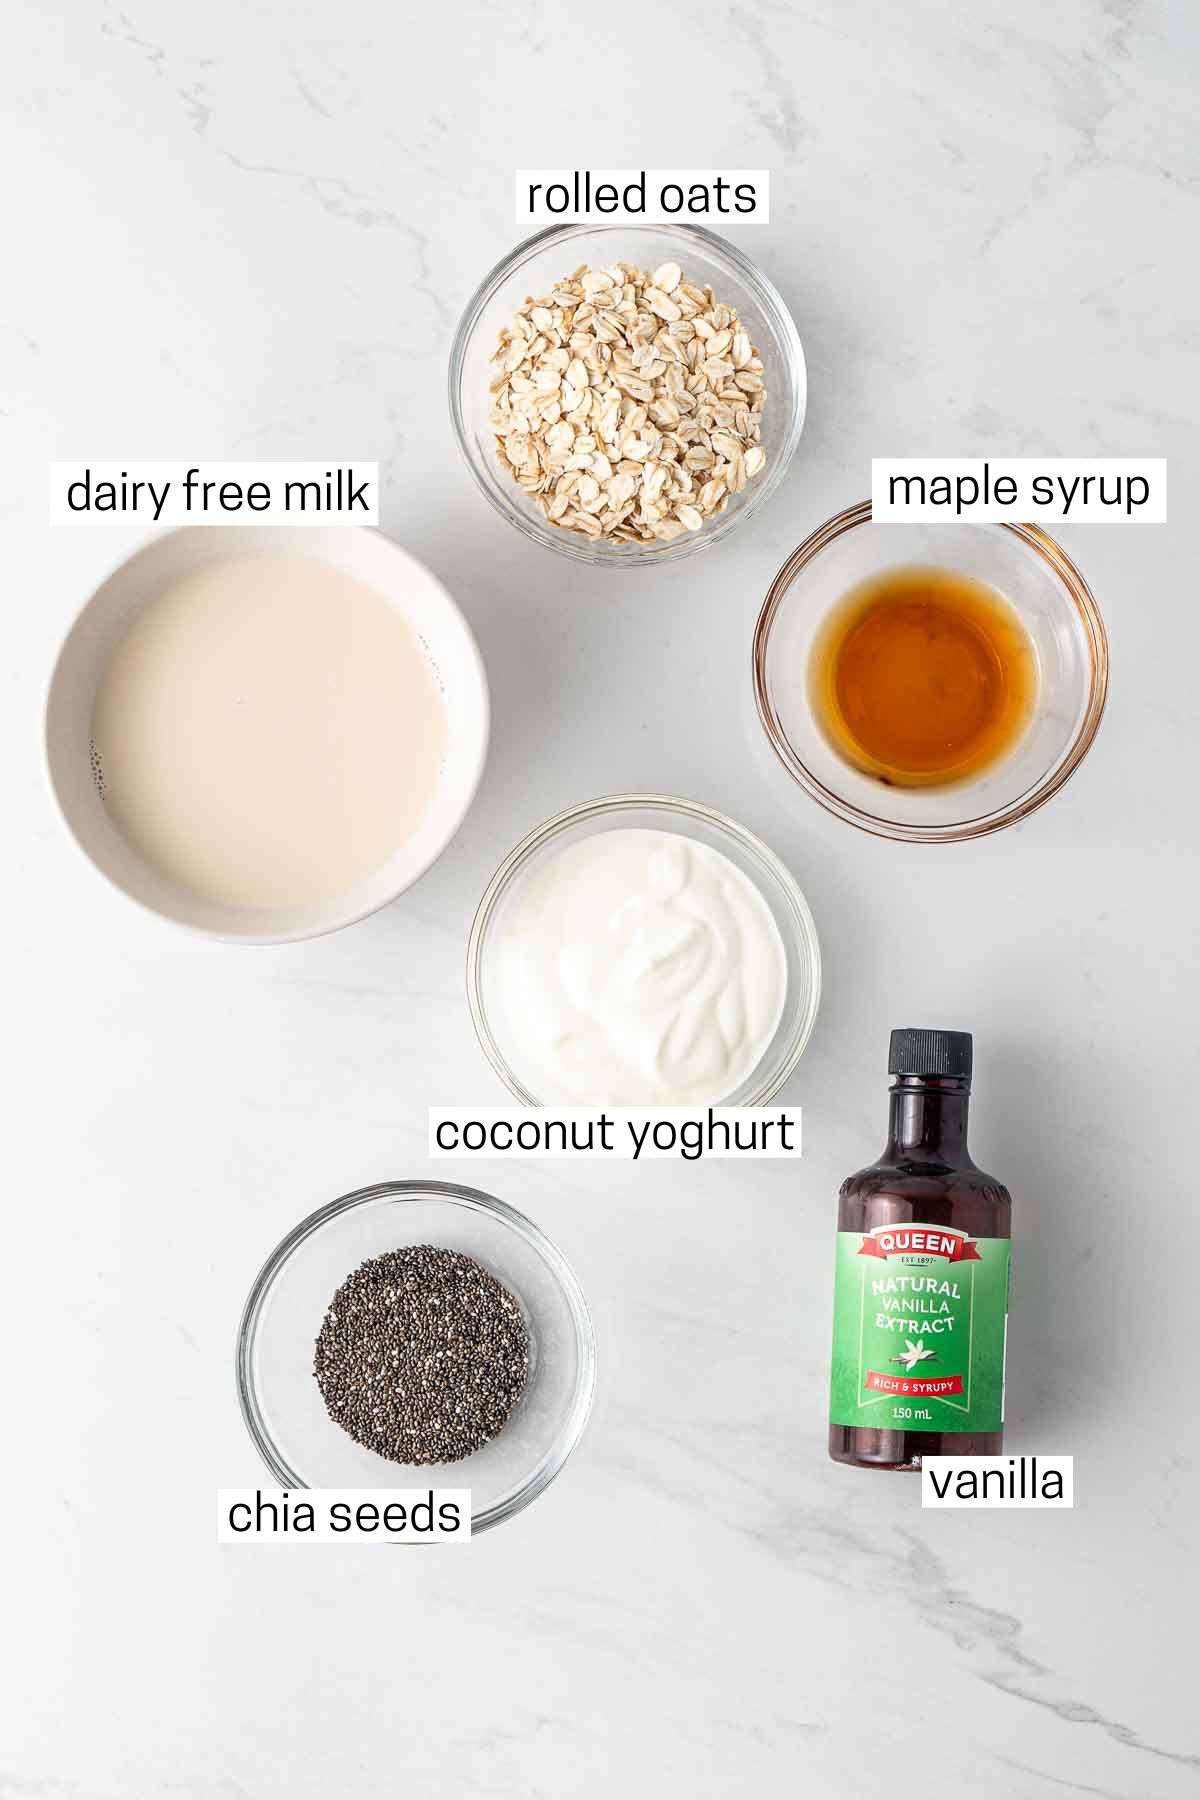 All ingredients needed for overnight oats laid out in small bowls.